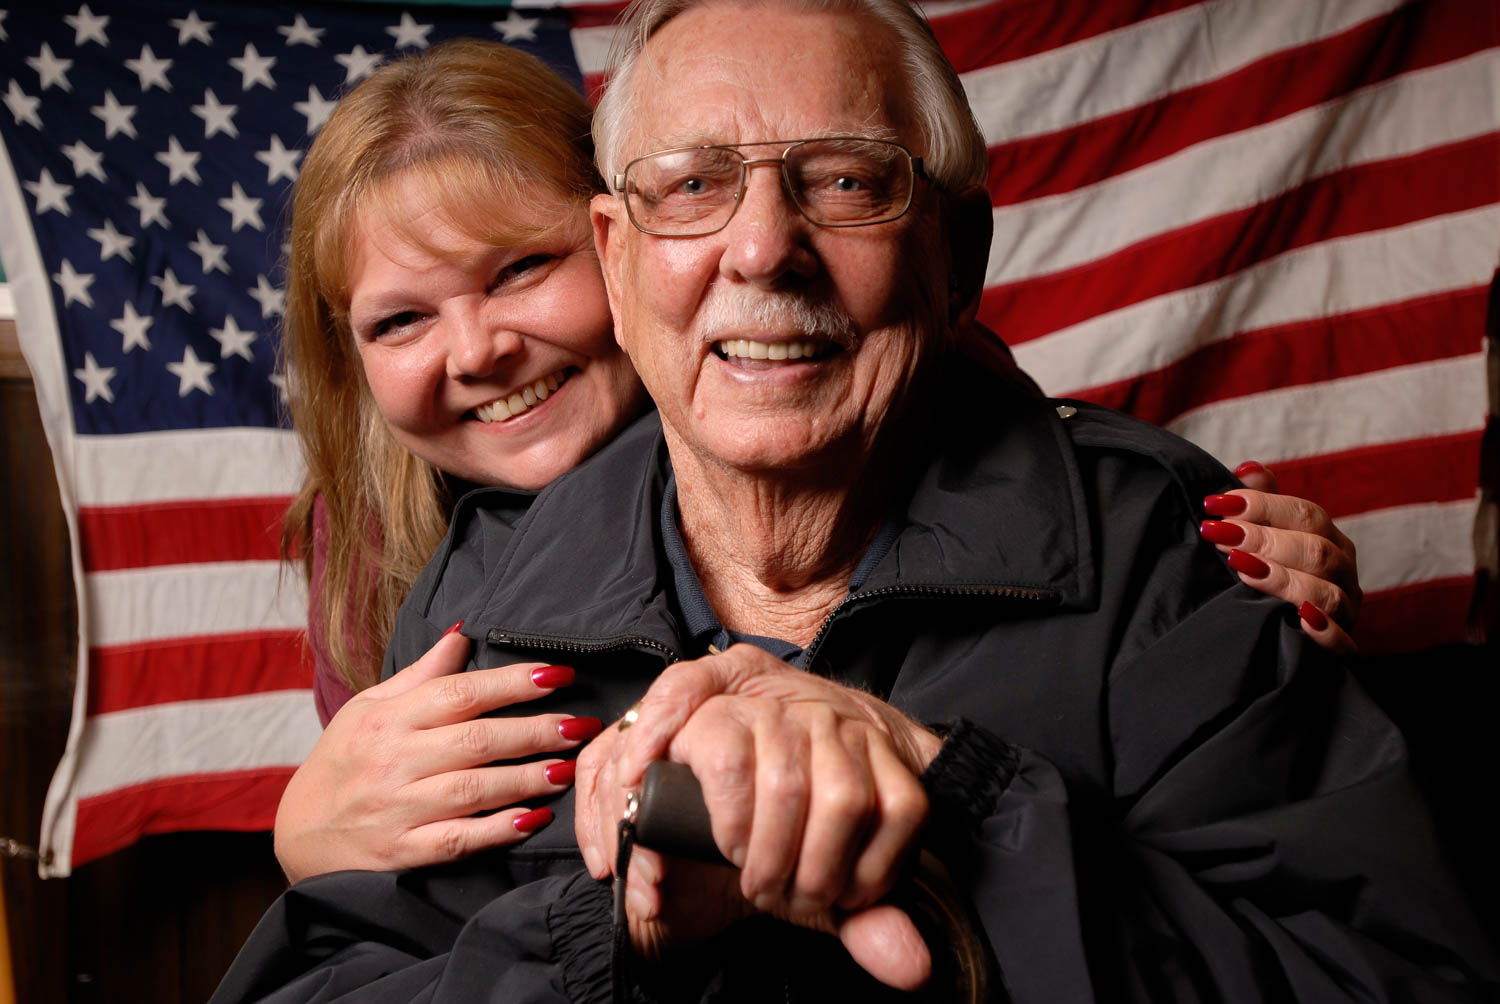 WWII veteran Joseph Colmer of East Moline will be accompanied by his daughter Sheri Jo Williams, left, and his son Bruce Colmer (not pictured) as they travel to Washington, D.C., Saturday as part of the inaugural Honor Flight of the Quad Cities. Mr. Colmer was a member of the U.S. Army's 82nd Airborne 325th Glider Infantry during WWII. On D-Day he and his unit landed 40-miles behind enemy lines and had to flight their way towards the beaches of Normandy to meet the advancing Allied forces. 